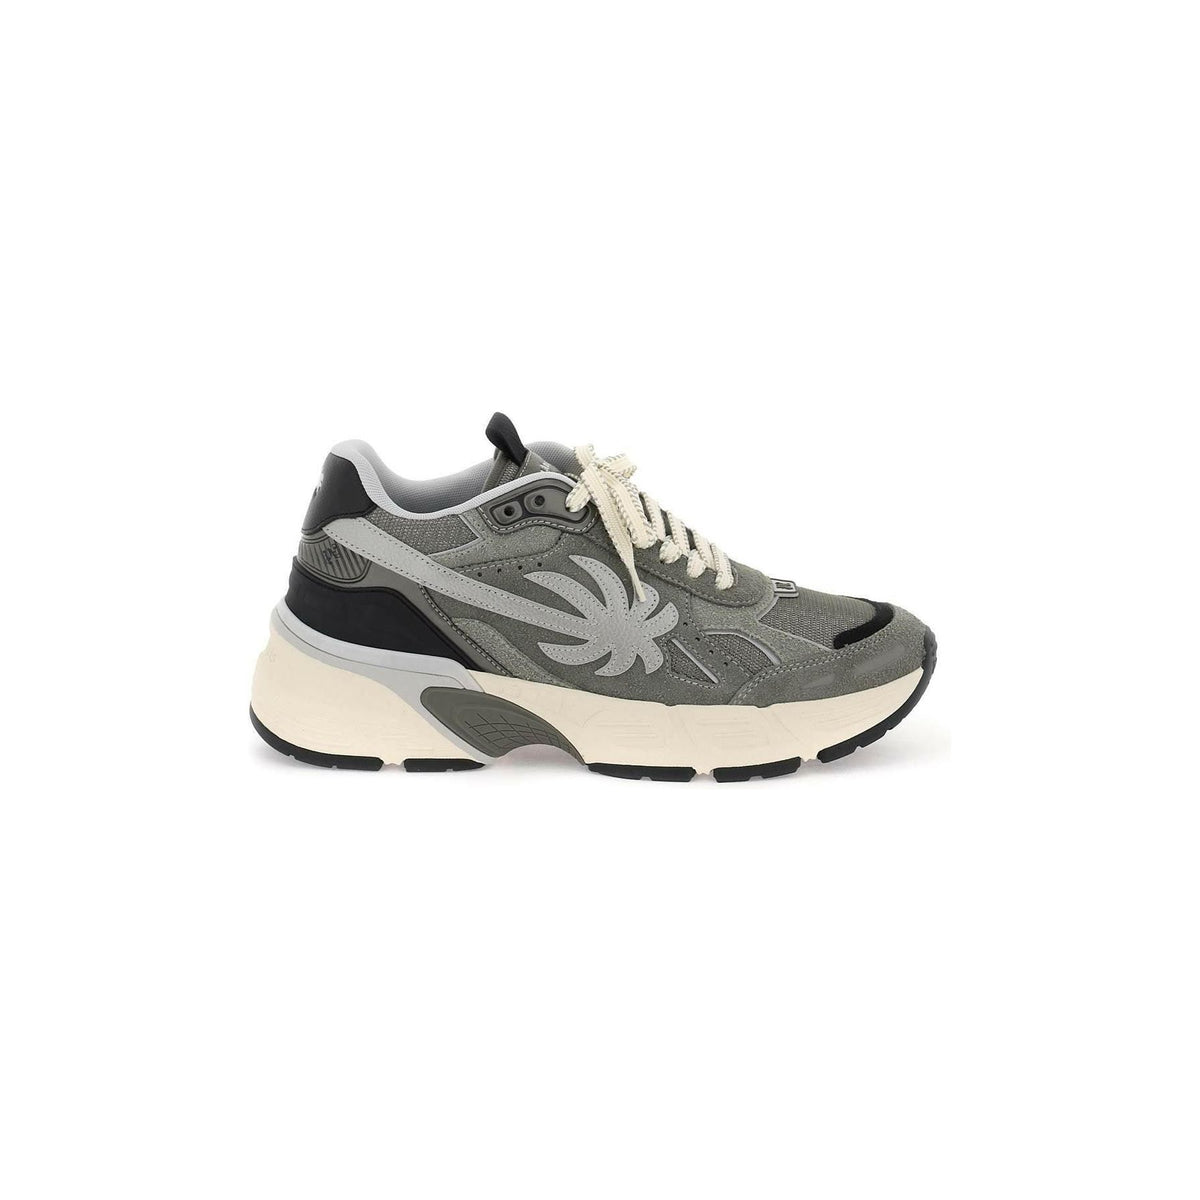 Palm Runner Sneakers For